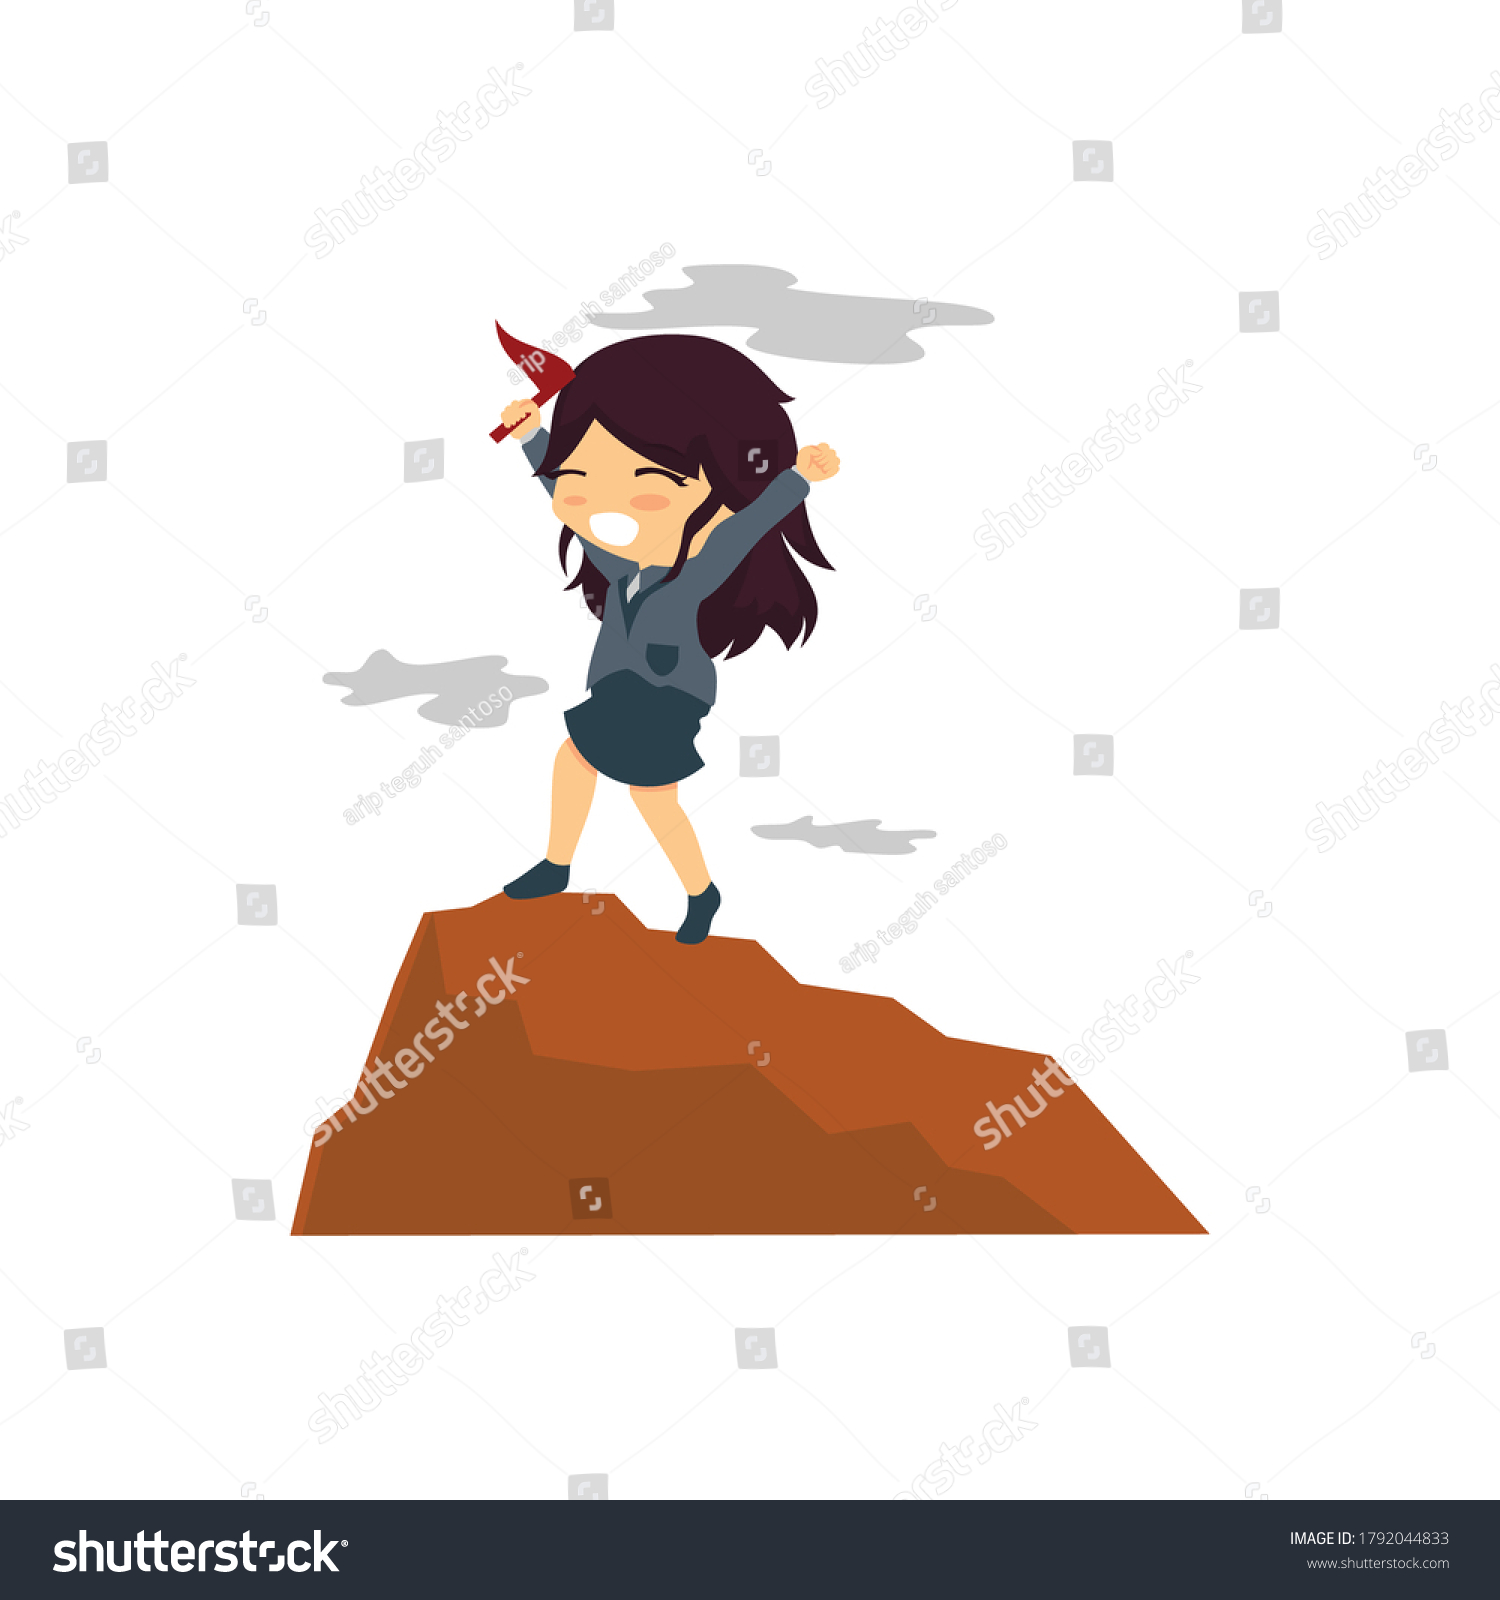 Businesswoman Hoisted Red Flag on Mountain Top #1792044833